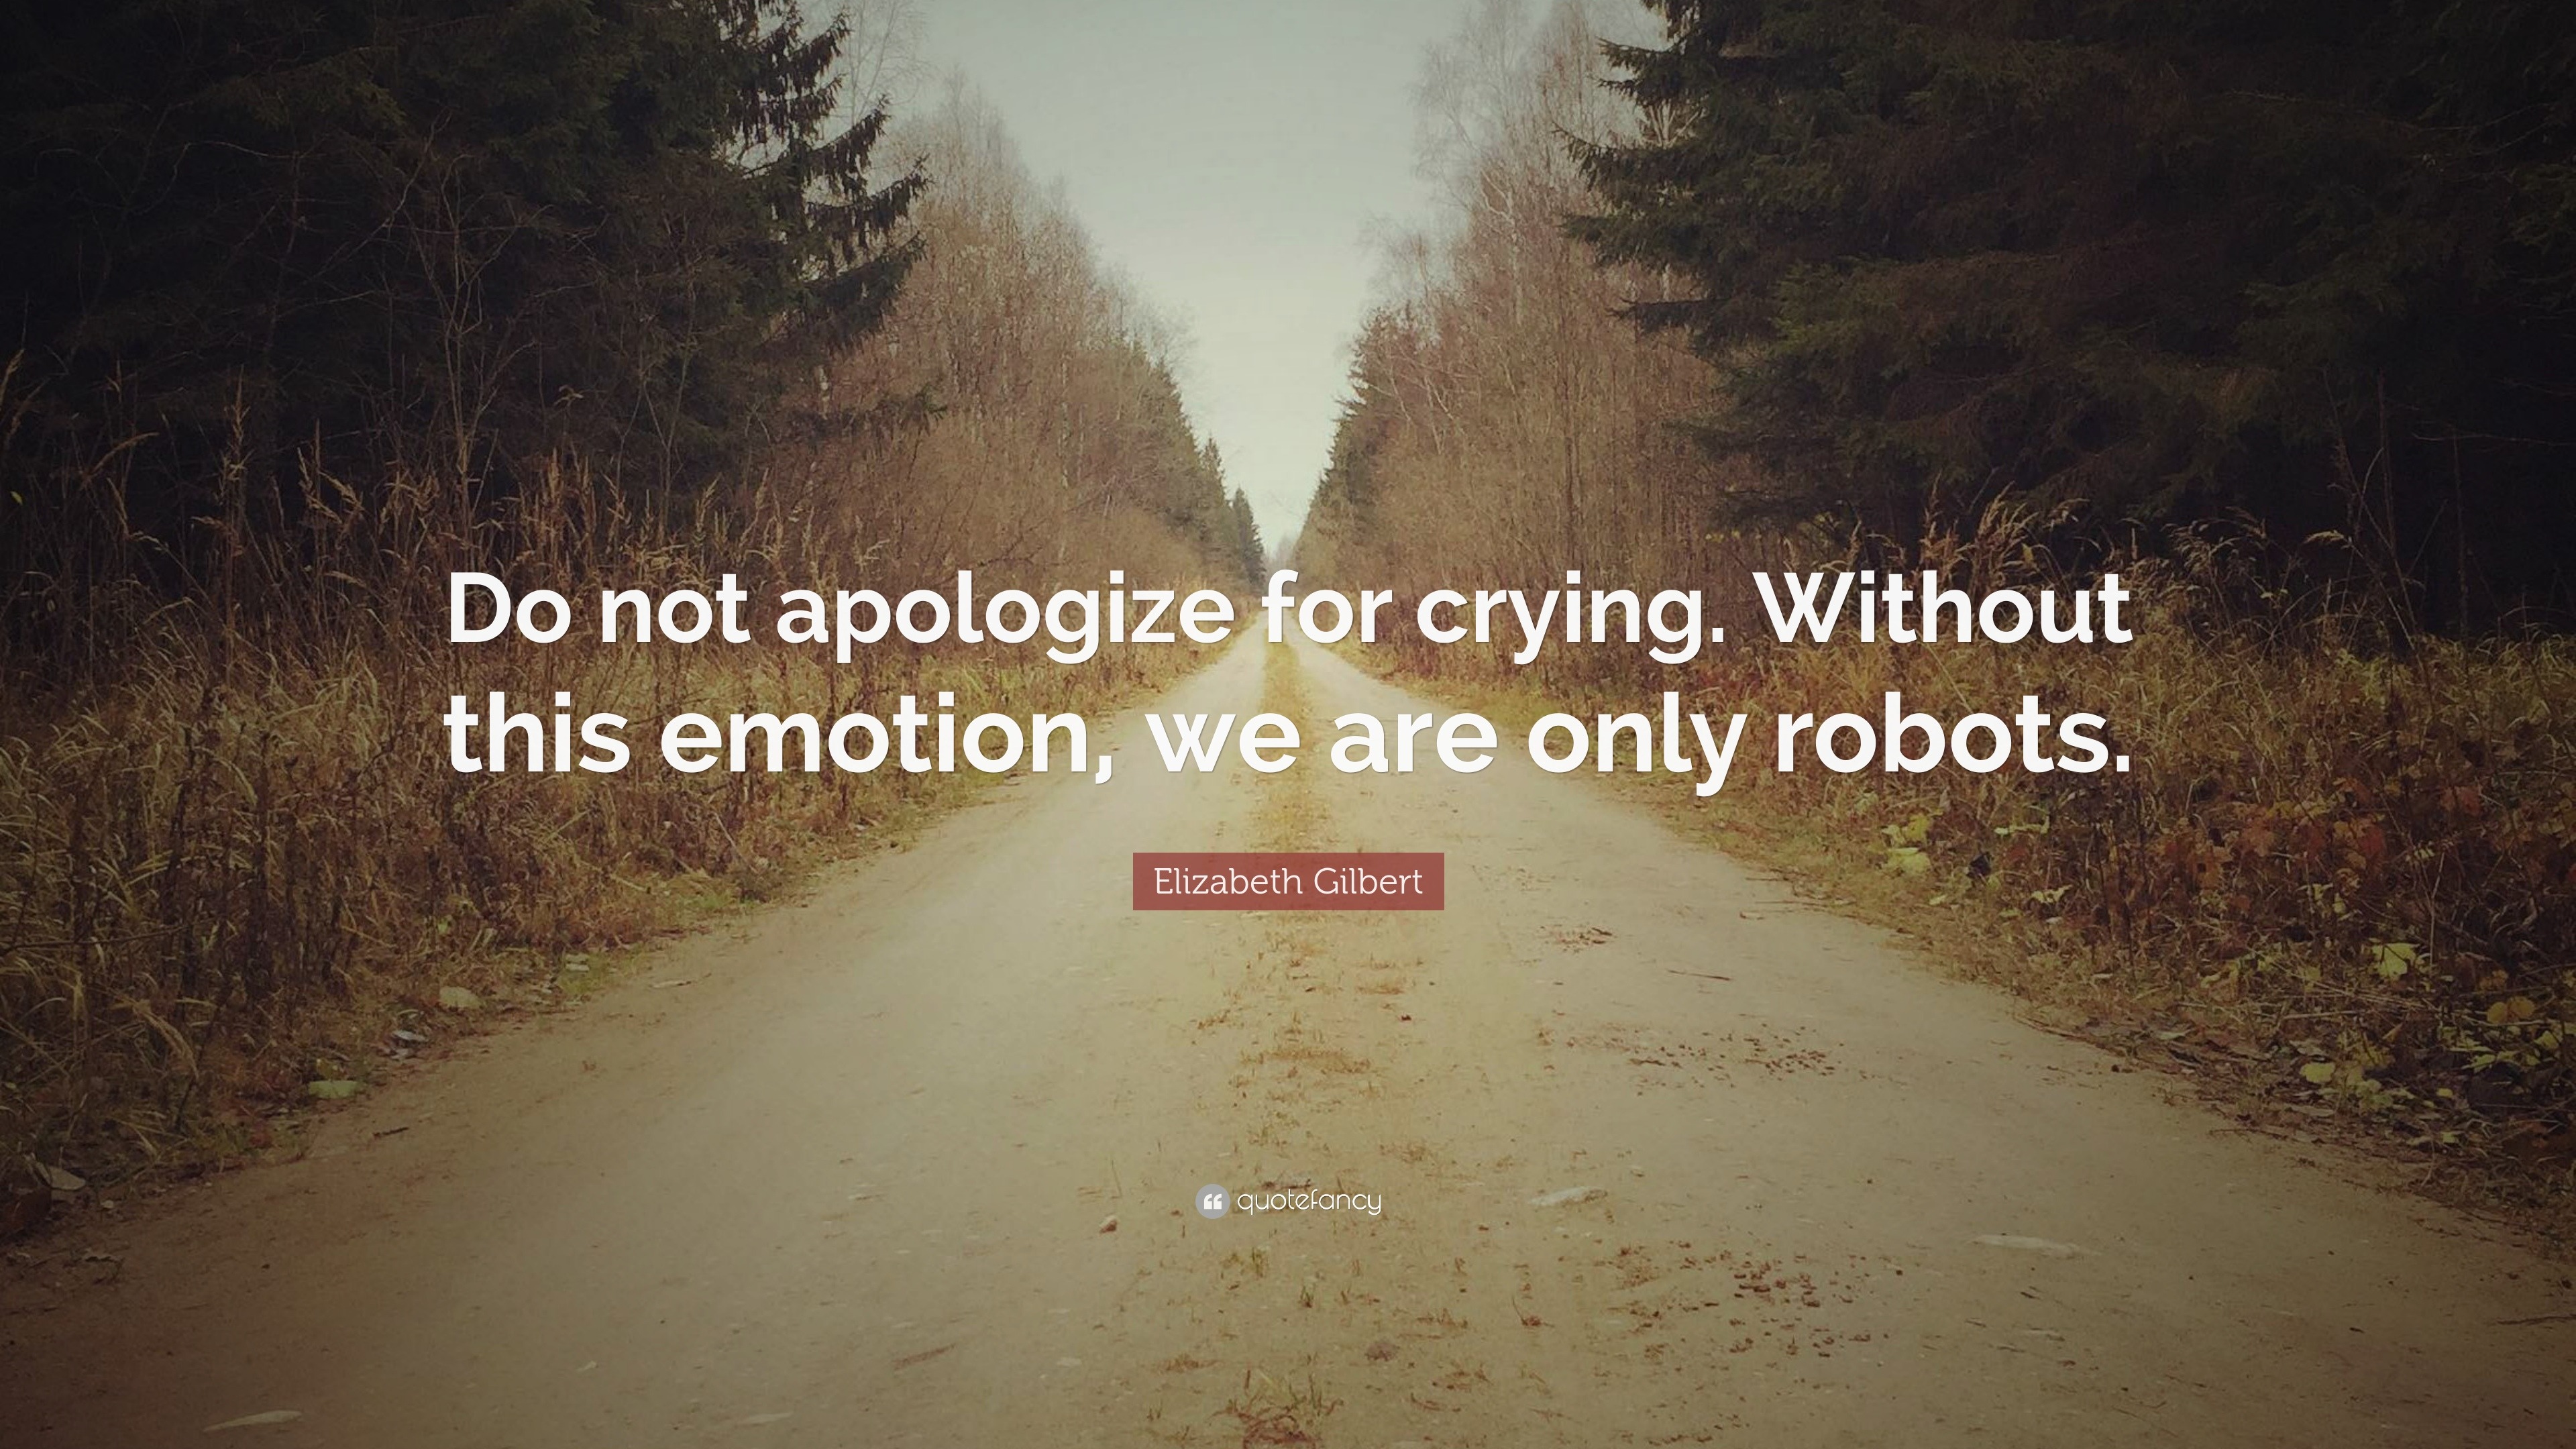 Elizabeth Gilbert Quote “do Not Apologize For Crying Without This Emotion We Are Only Robots ”